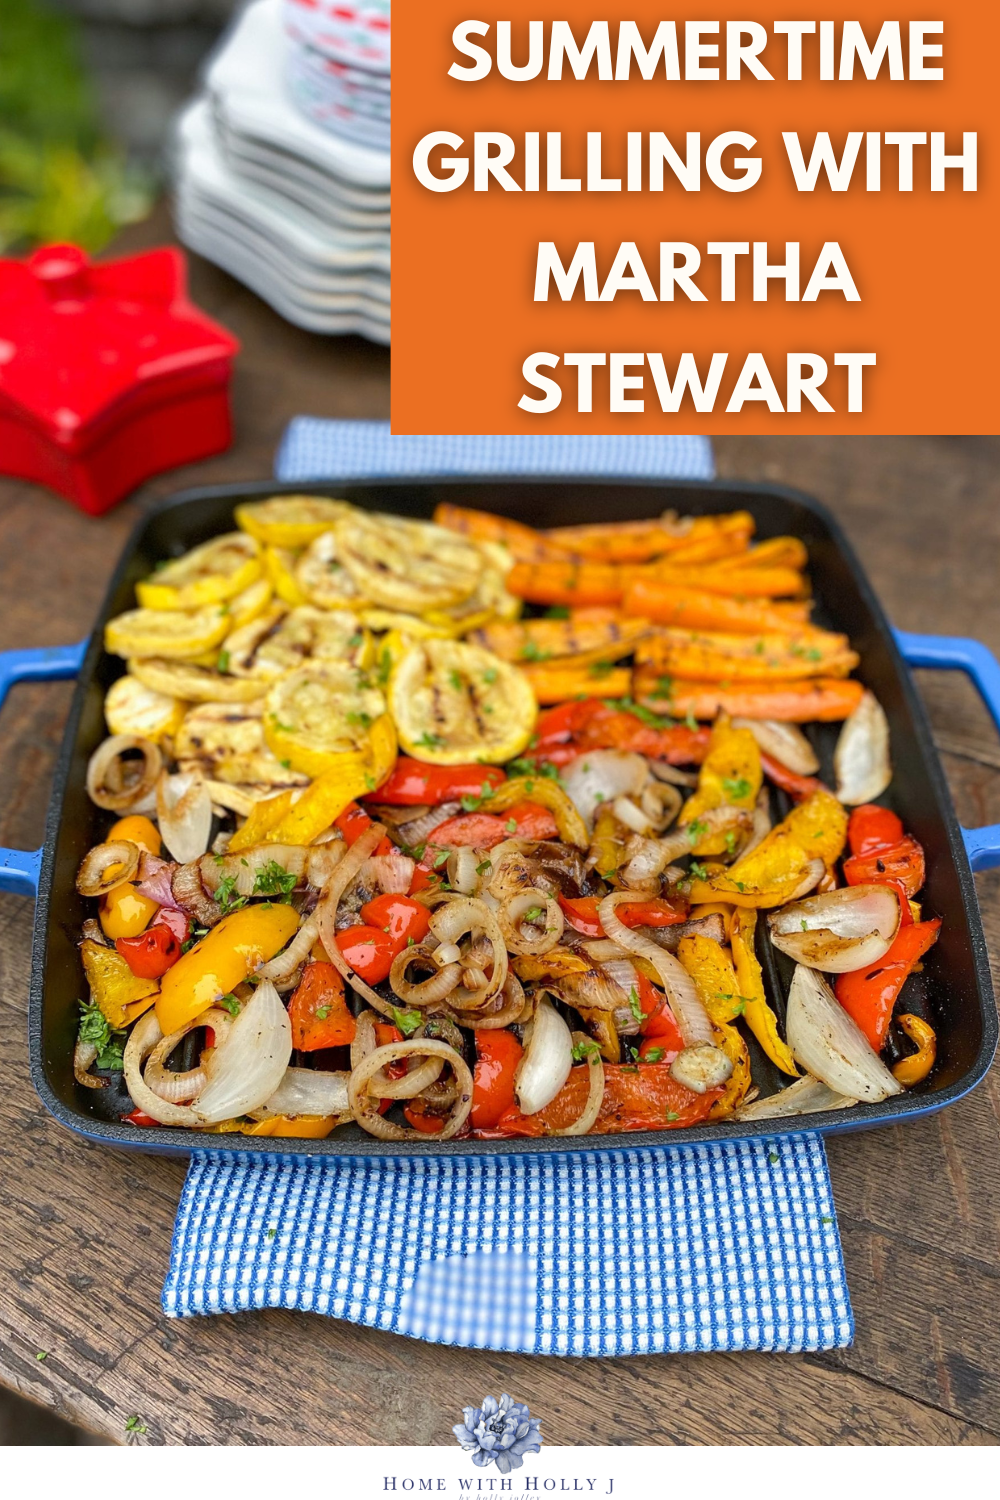 It's the perfect time for an outdoor summer BBQ and grilling with Martha Stewart. Learn my best tips on entertaining and hosting!